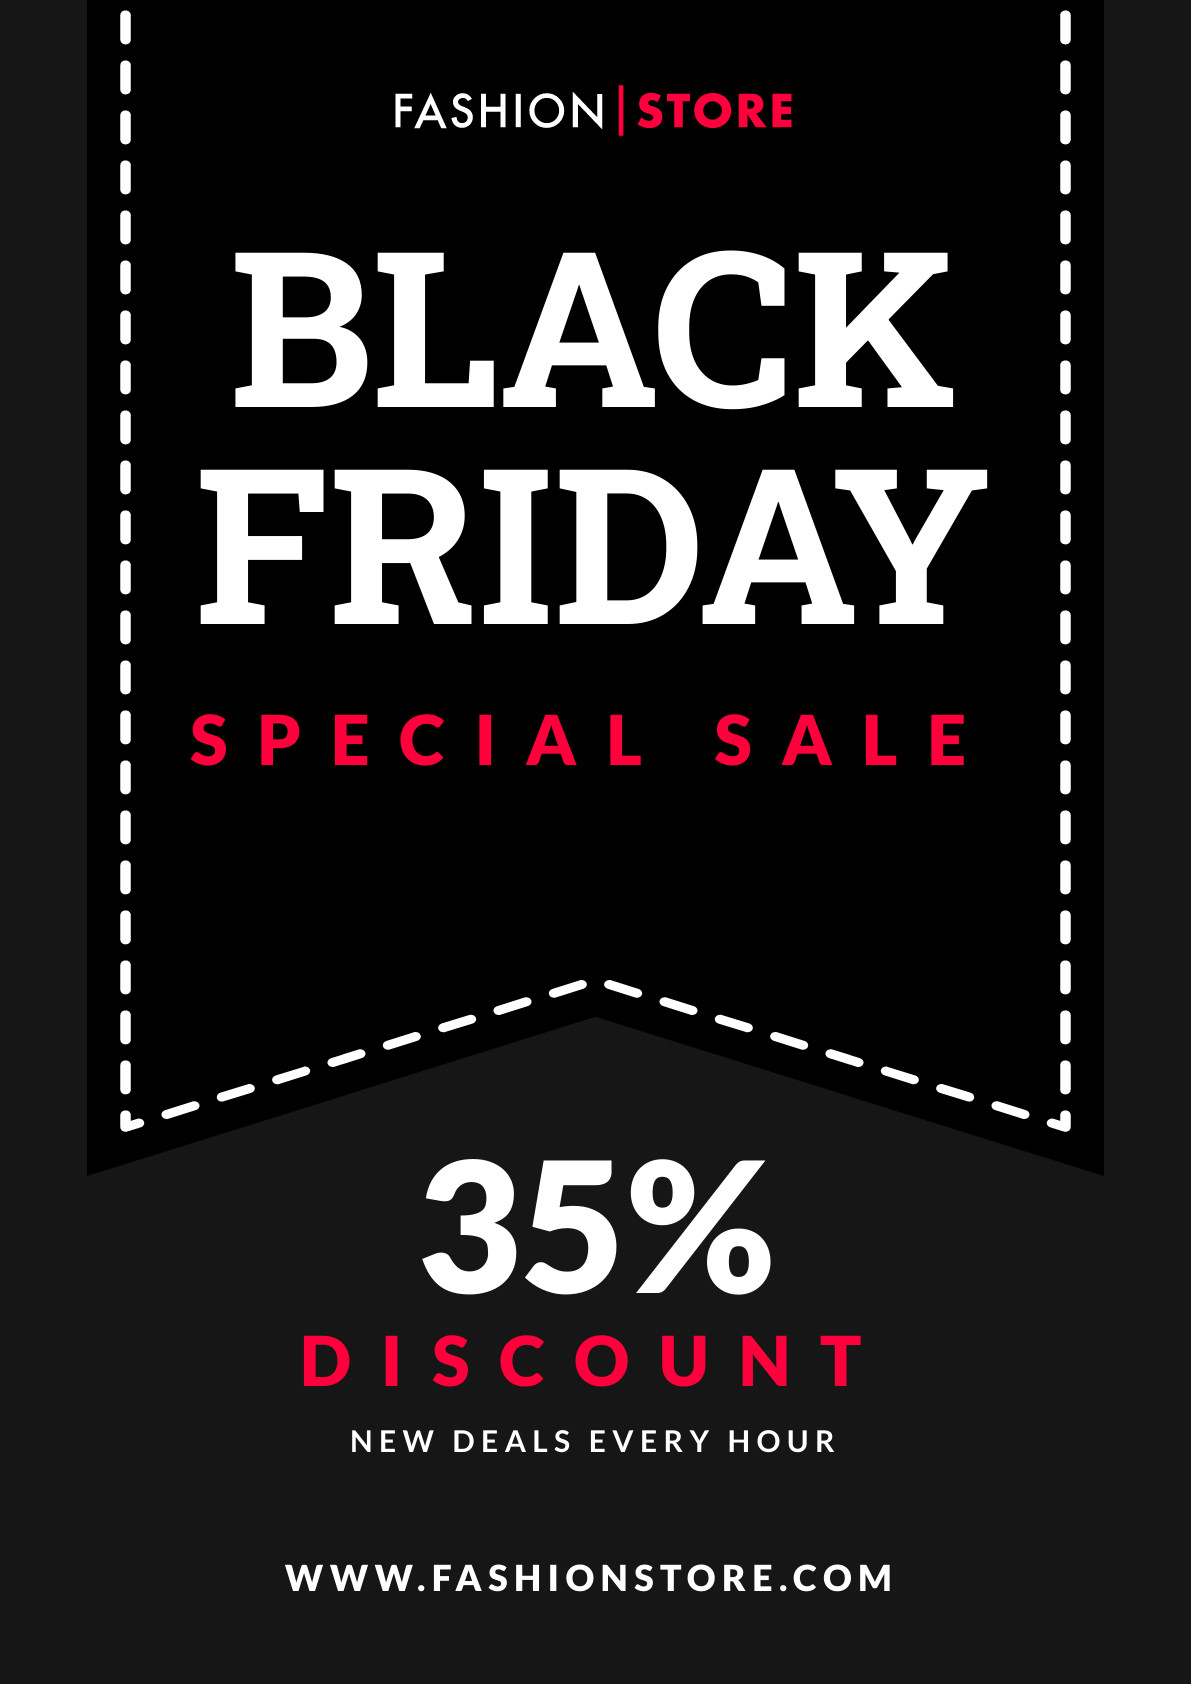 Black Friday Fashion Store Special Sale Poster 1191x1684